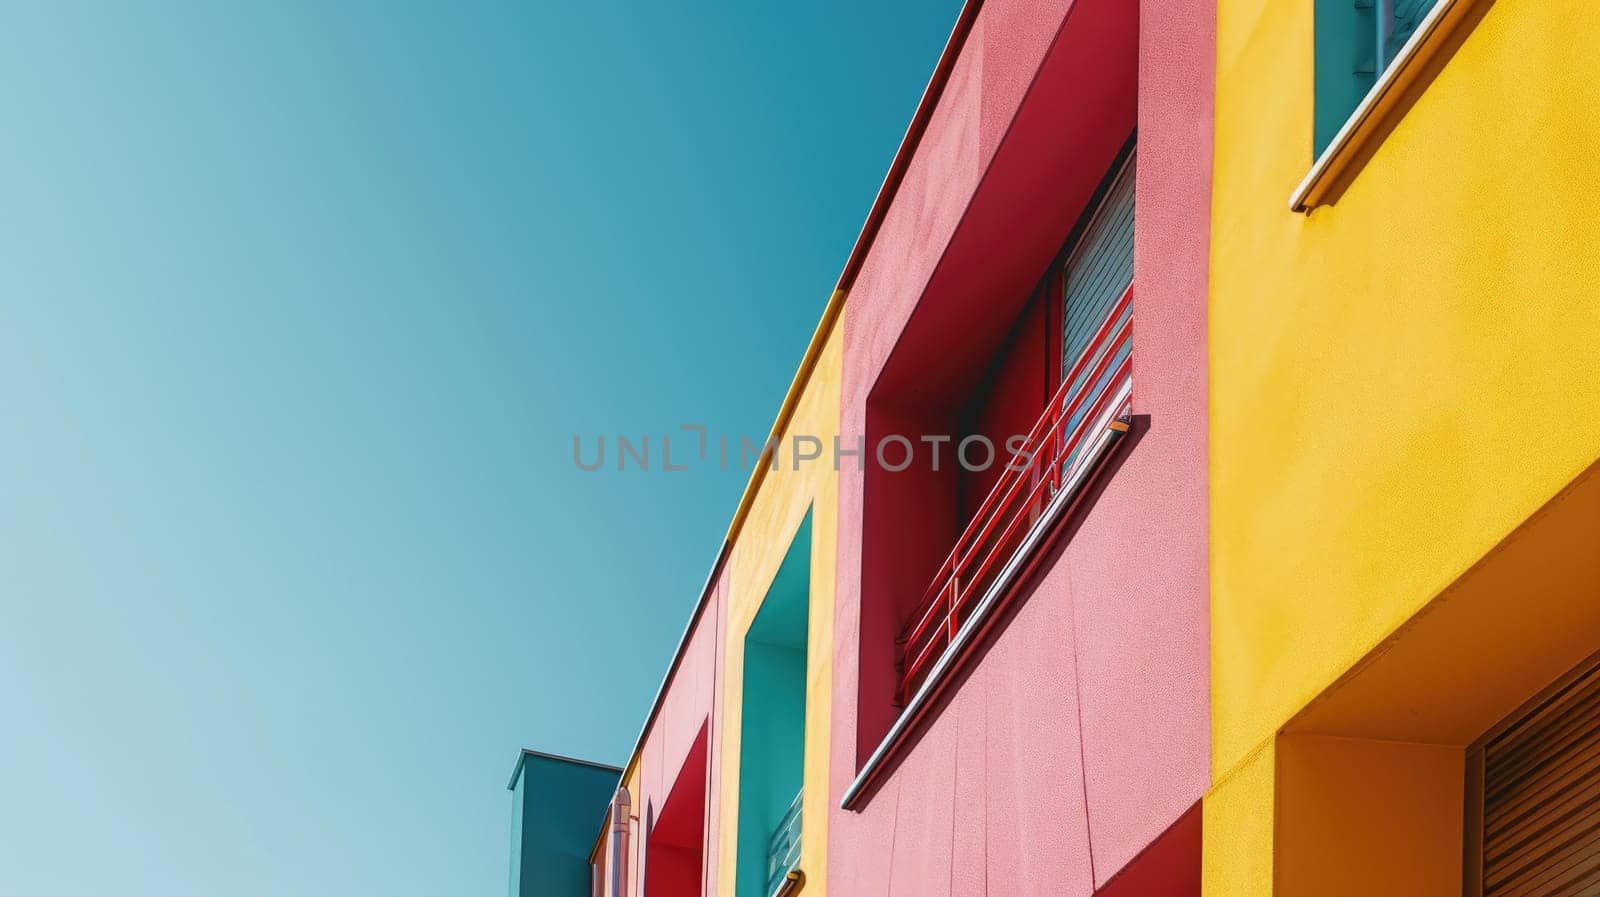 The colourful structure under the bright clear blue sky with the ray of light from brightest sun that cover most part of the building but even that the structure still left some the shadow. AIGX03.